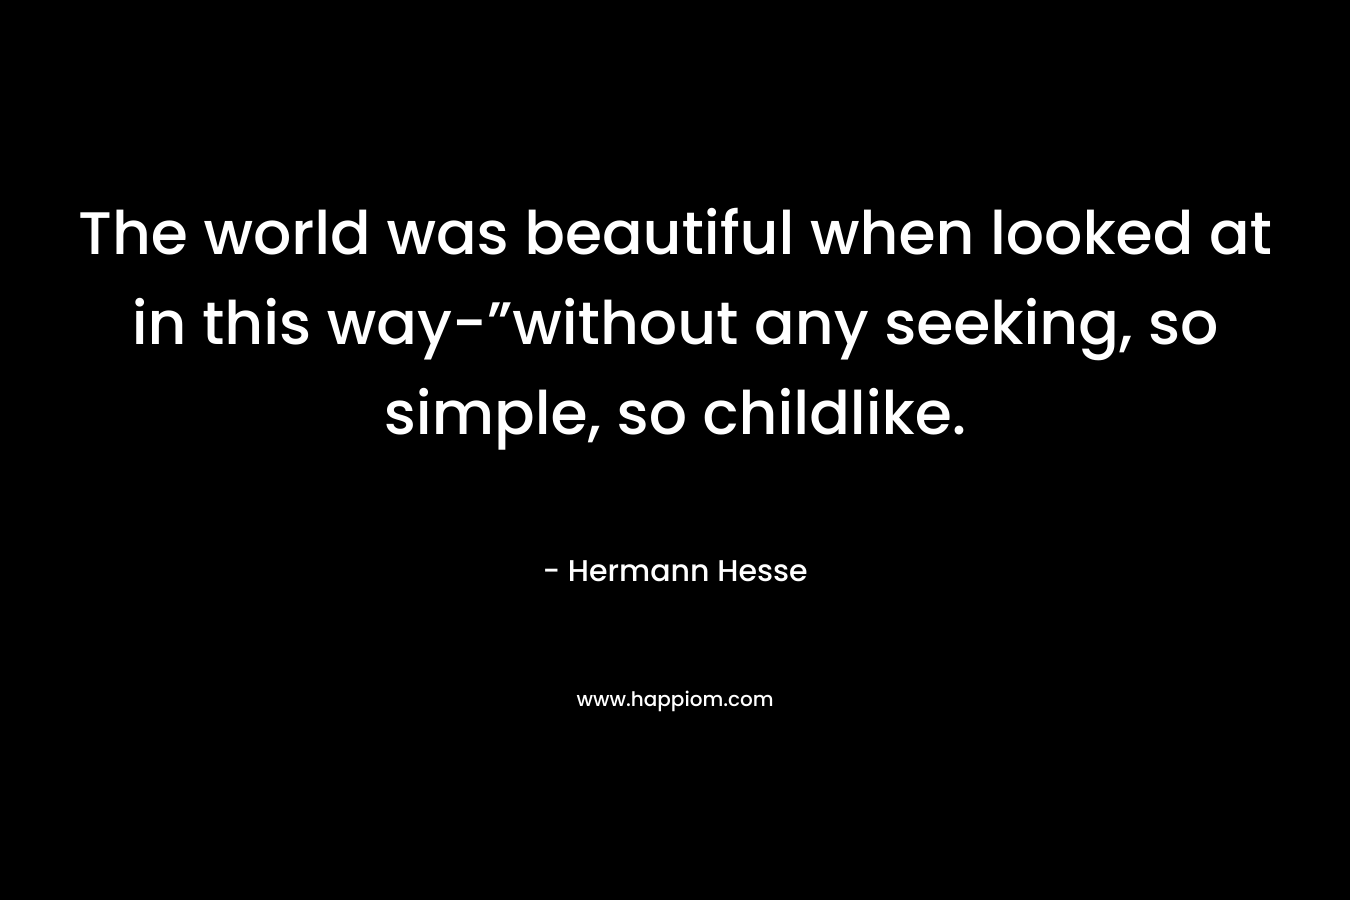 The world was beautiful when looked at in this way-”without any seeking, so simple, so childlike.